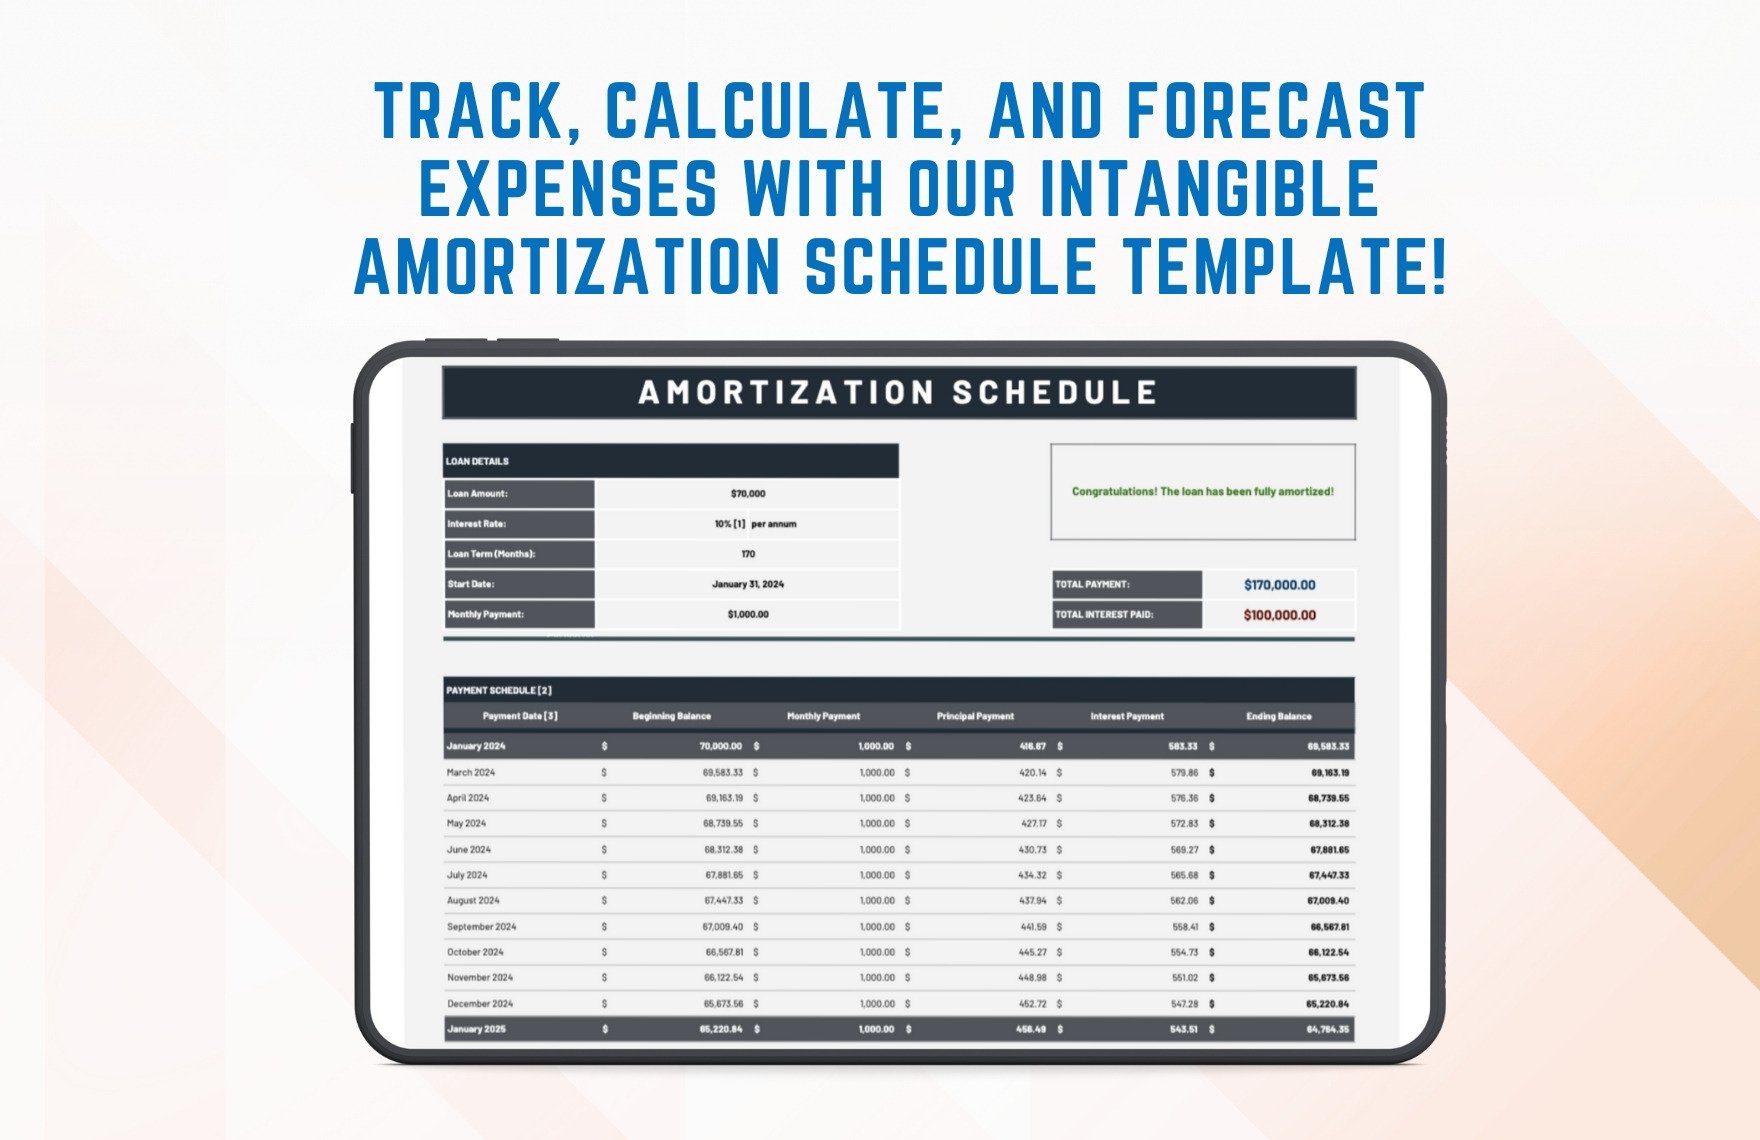 Intangible Amortization Schedule Template